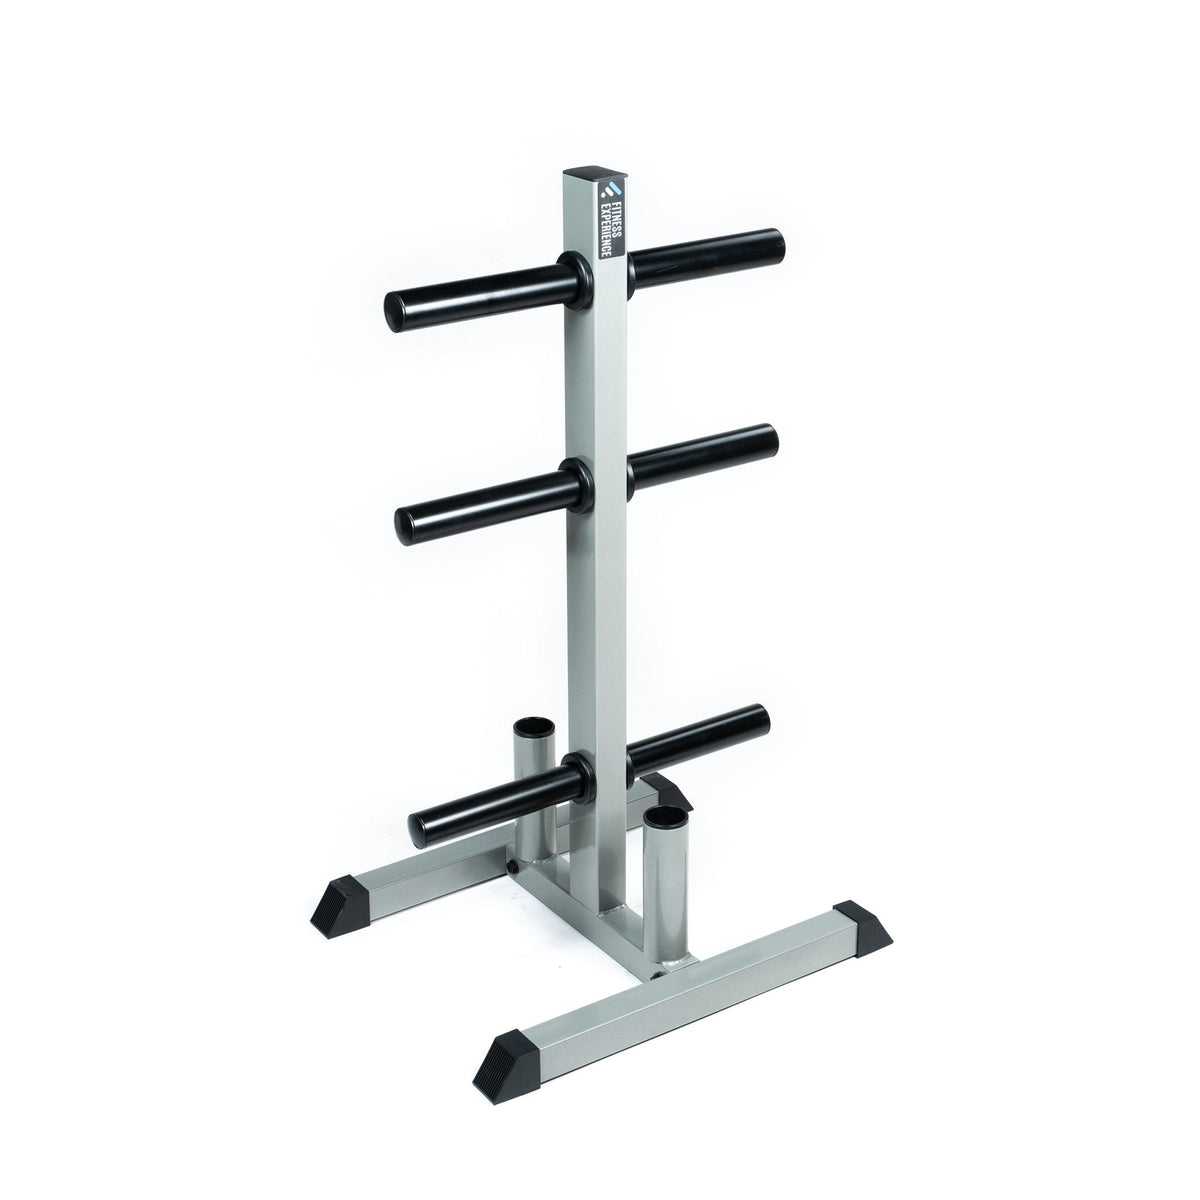 FitWay Equip. Olympic Plate Tree with 2 Bar Holder - Fitness Experience